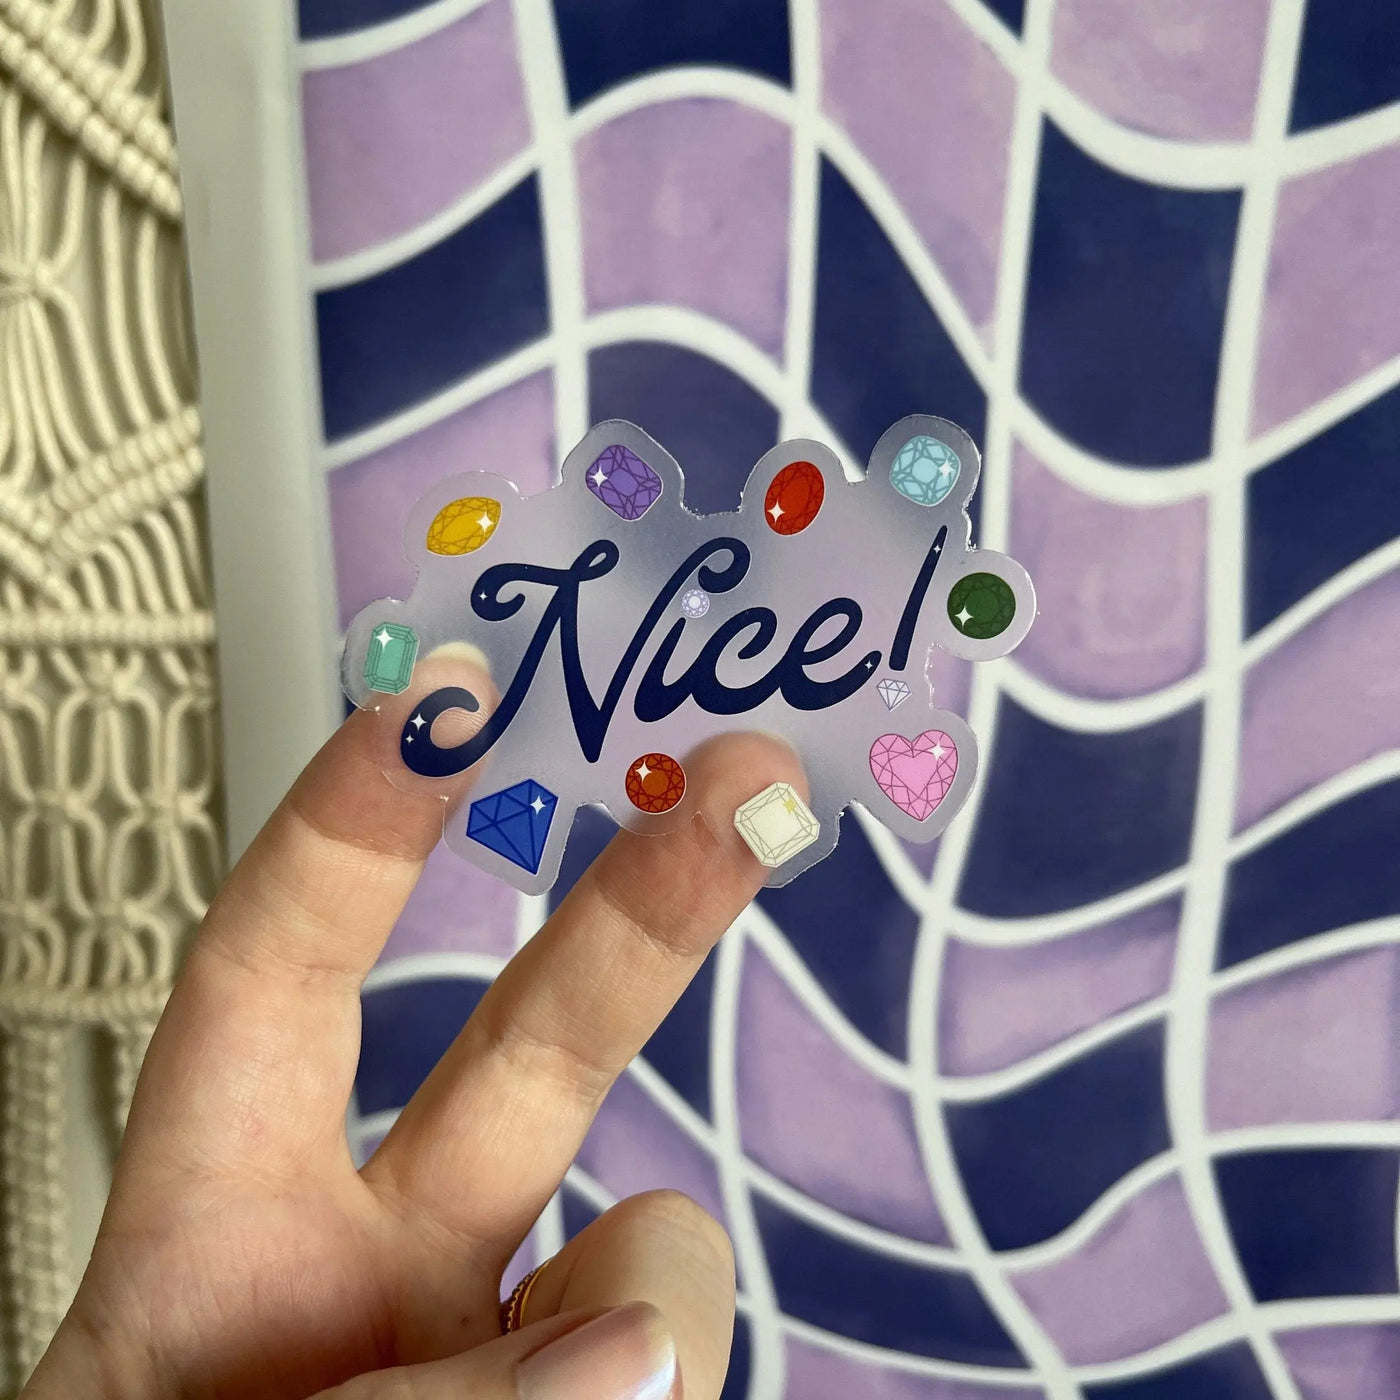 CLEAR NICE! Eras bejeweled sticker MangoIllustrated